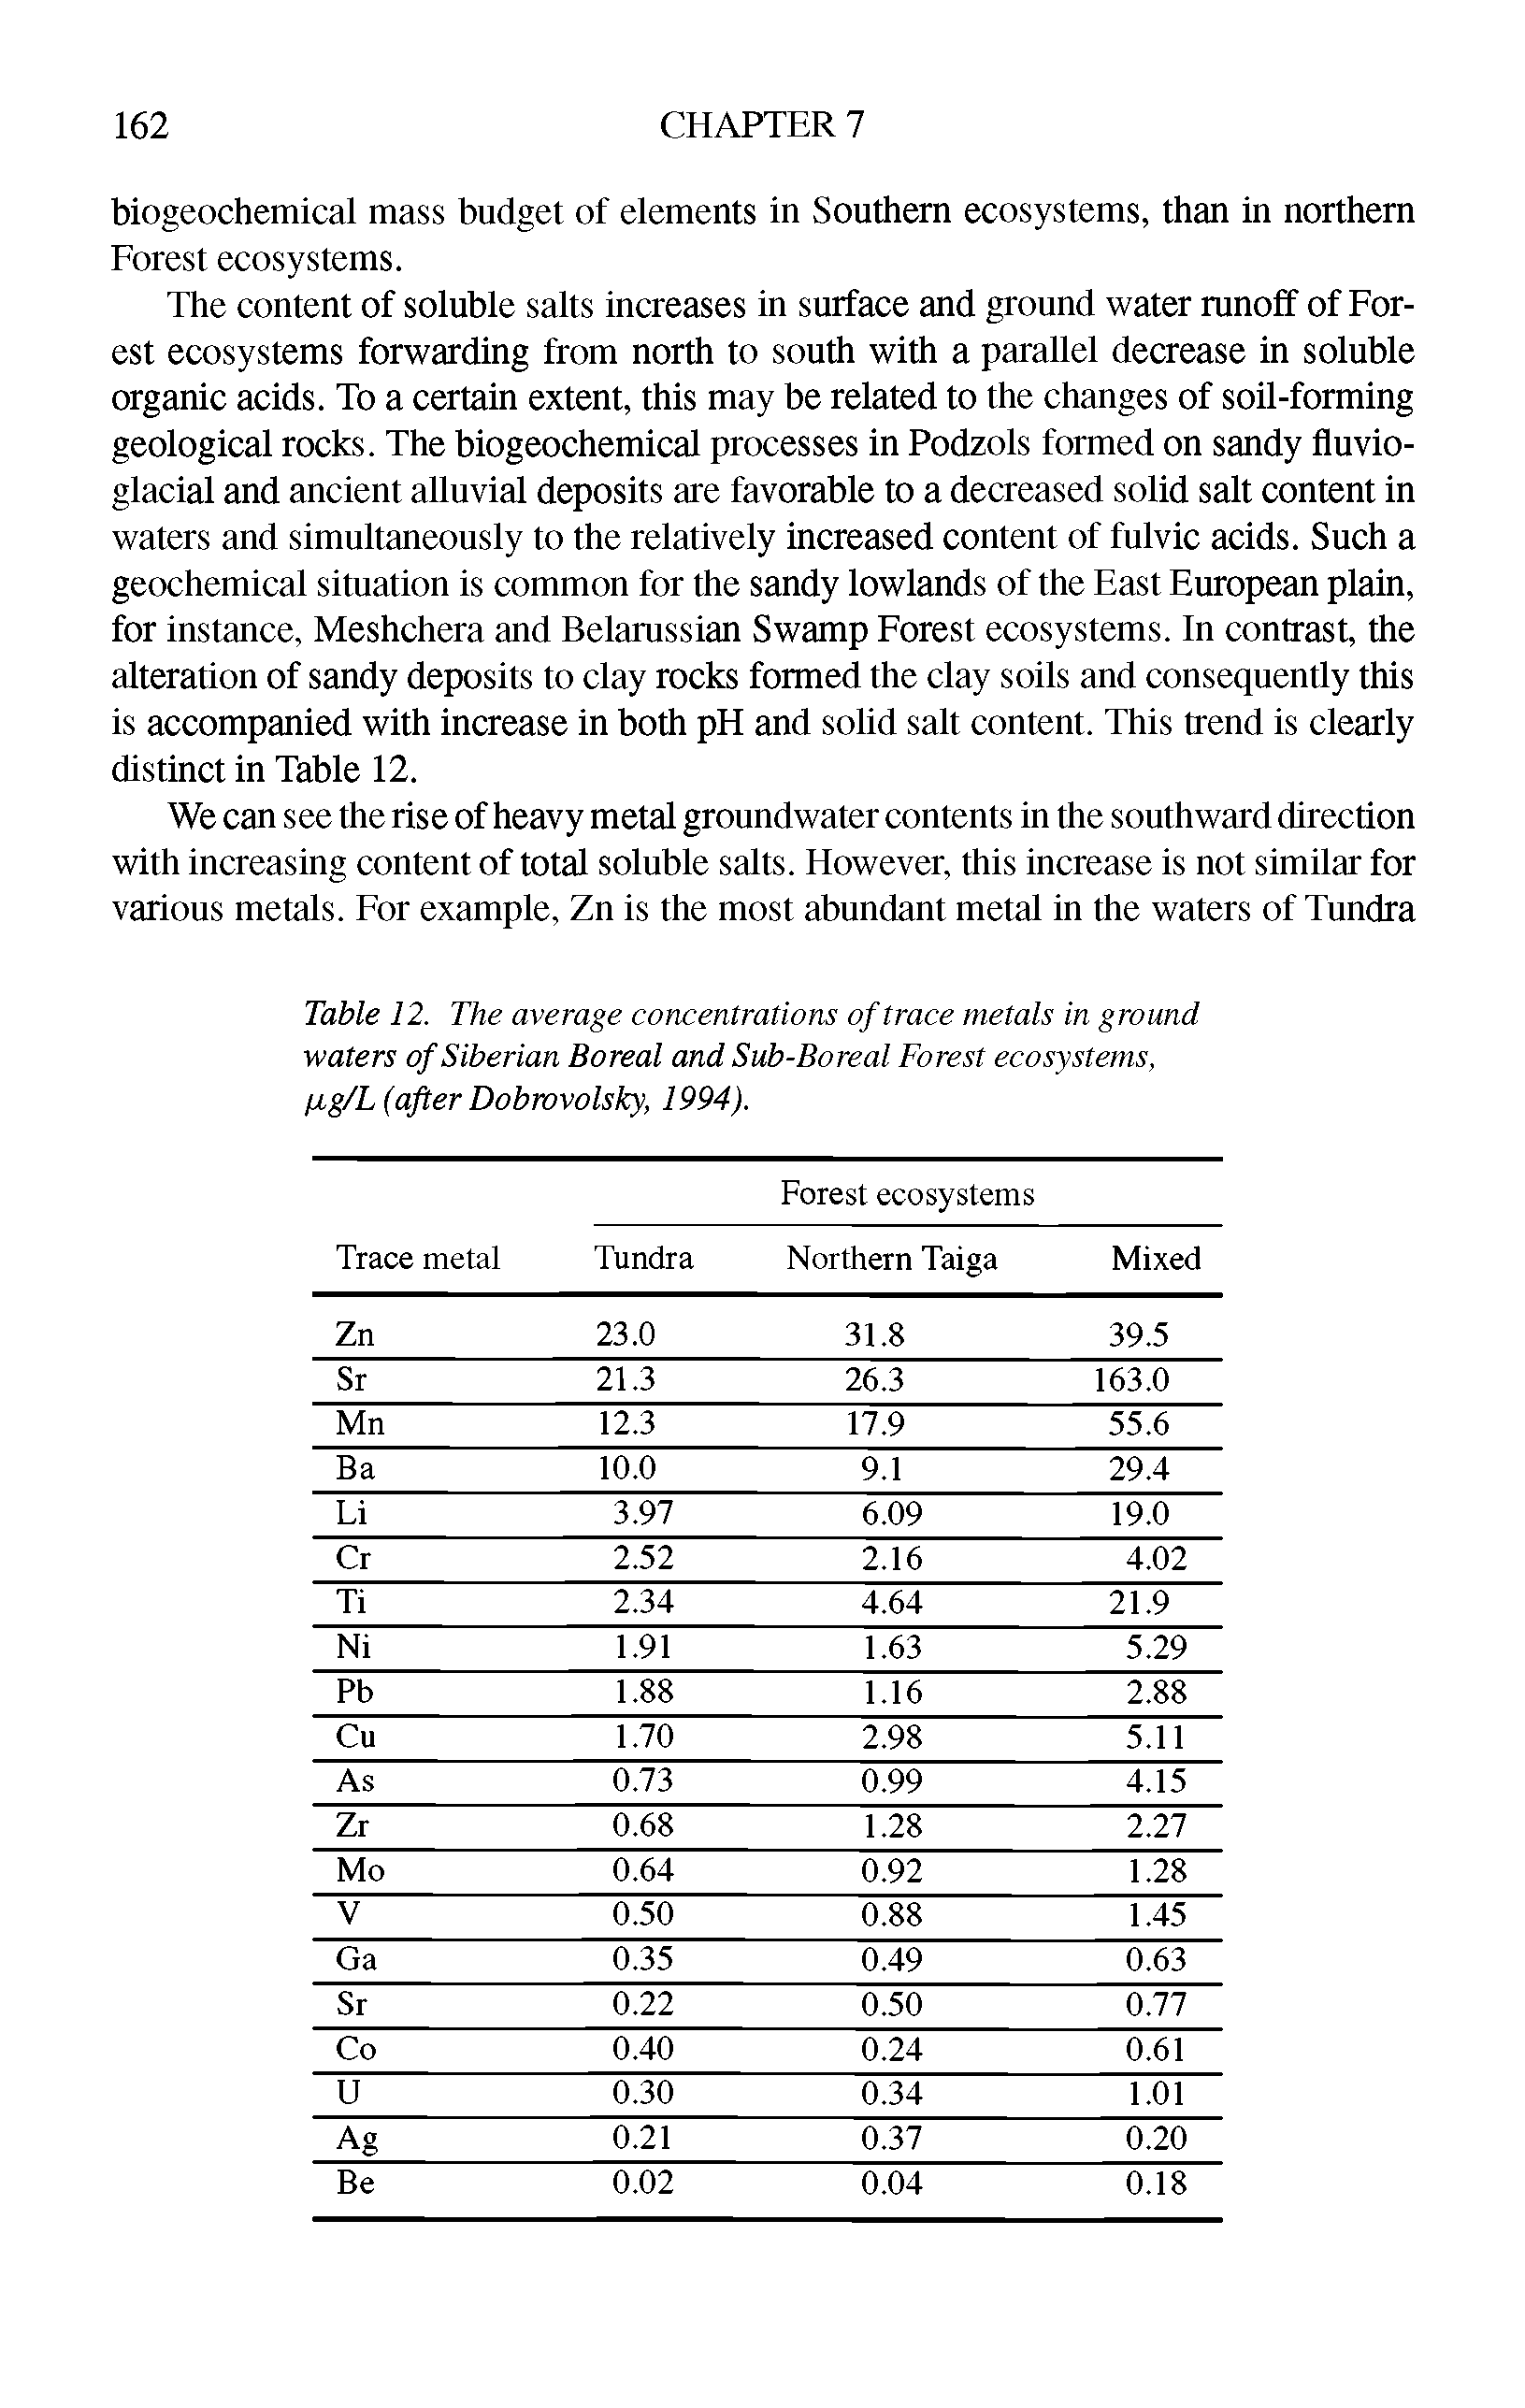 Table 12. The average concentrations of trace metals in ground waters of Siberian Boreal and Sub-Boreal Forest ecosystems, fig/L (after Dobrovolsky, 1994).